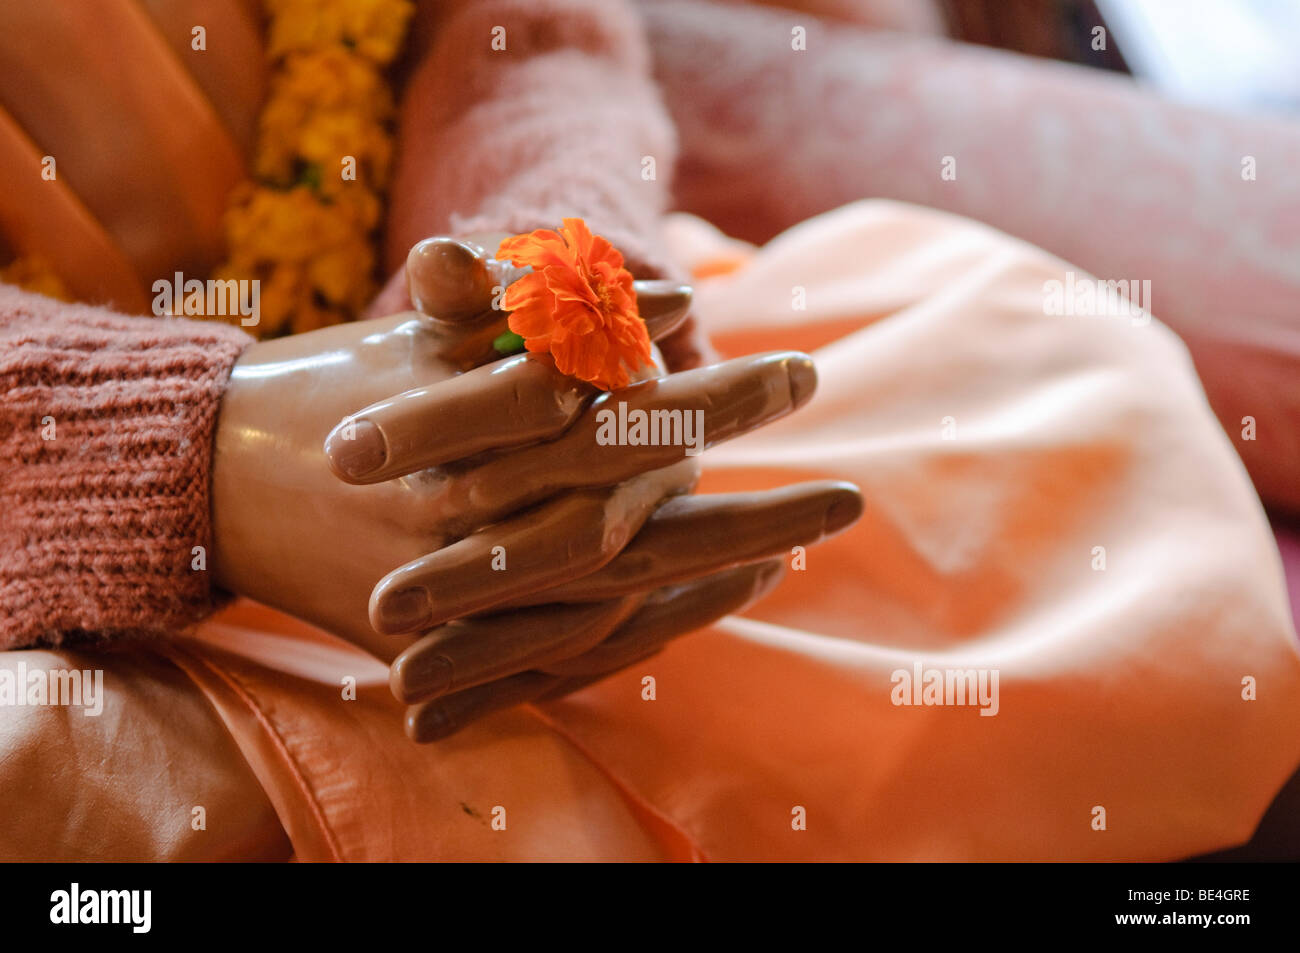 The hands of a statue of His Divine Grace A.C. Bhaktivedanta Swami Prabhupada holding a single flower. Stock Photo